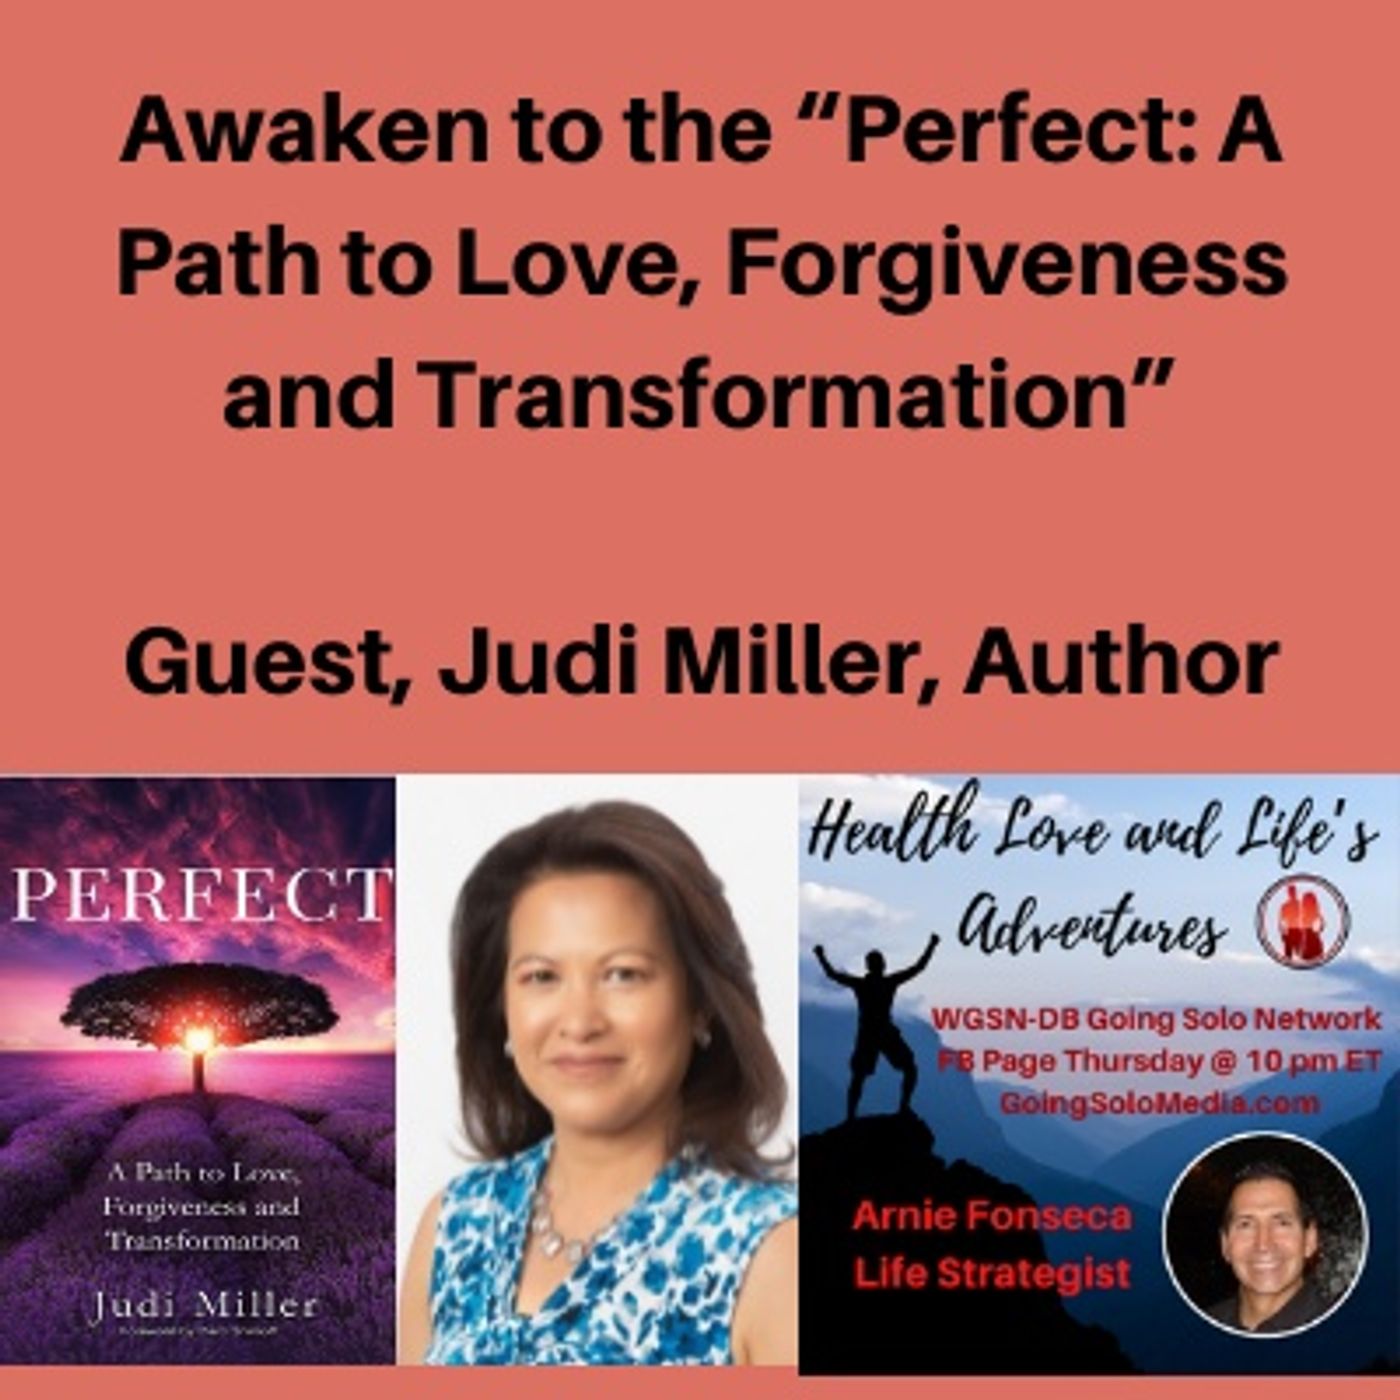 Awaken to the “Perfect_ A Path to Love, Forgiveness and Transformation”